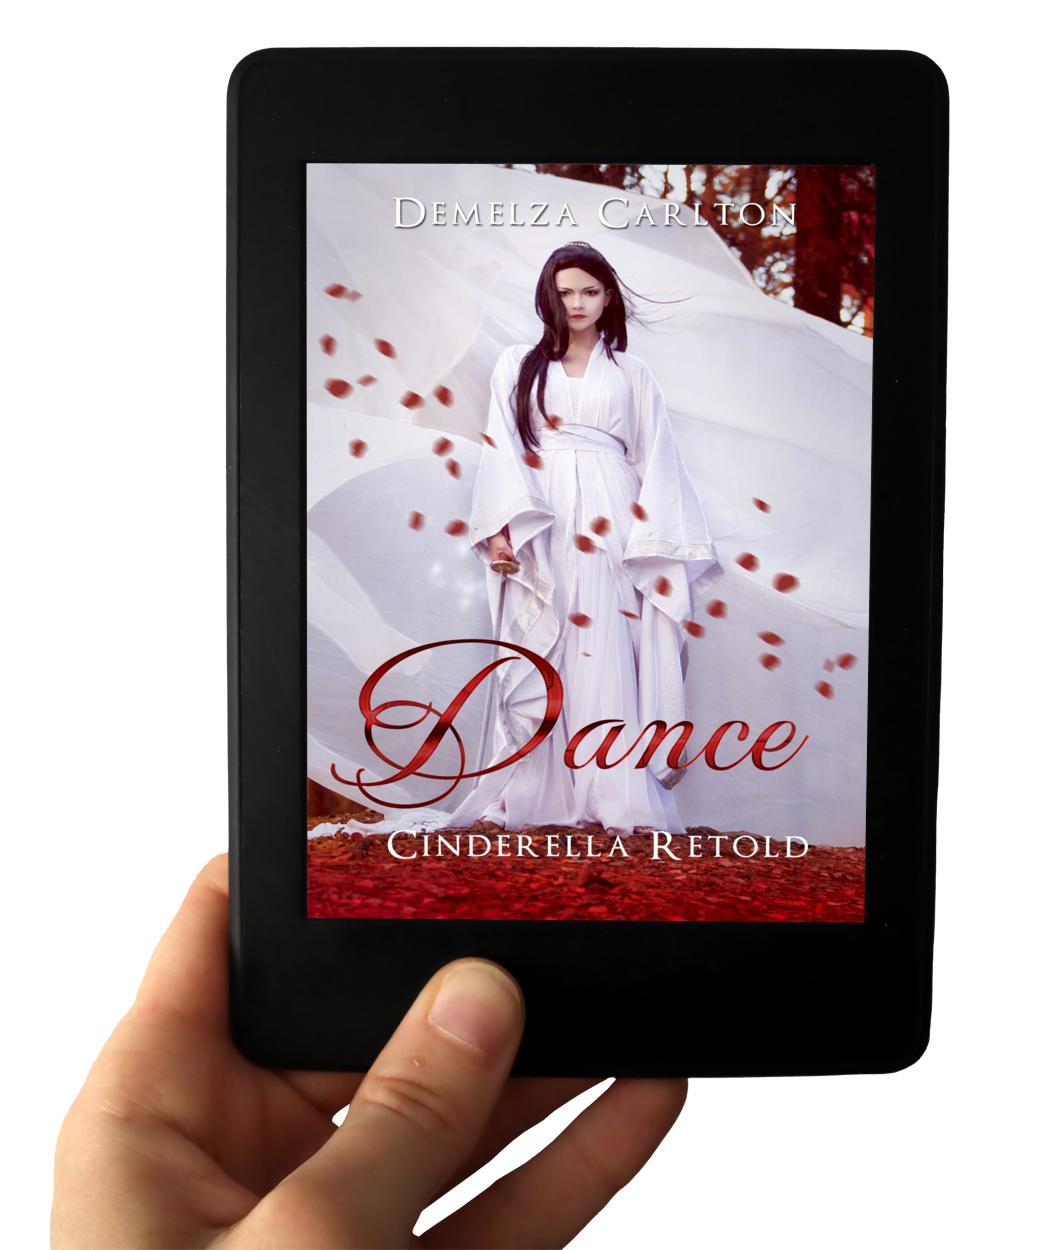 Dance: Cinderella Retold Book 2 in the Romance a Medieval Fairytale series by USA Today Bestselling Author Demelza Carlton ebook